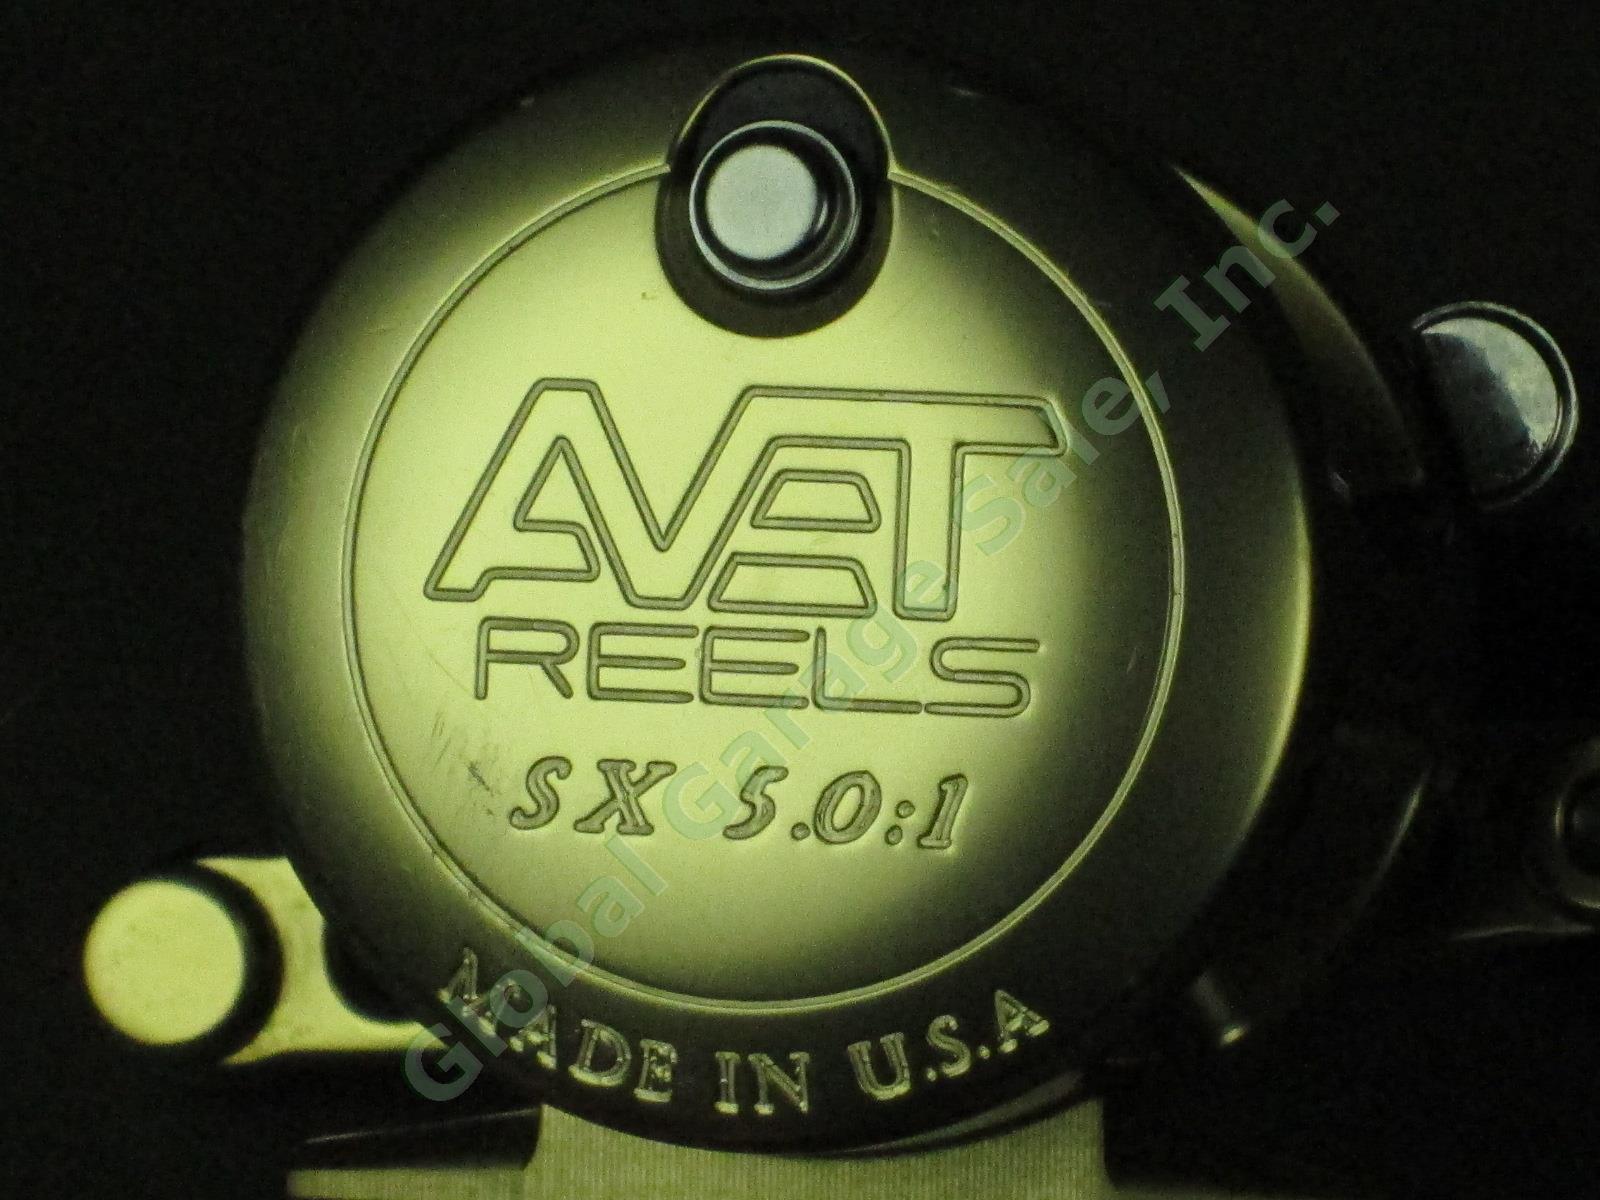 Avet SX 5.0:1 Lever Drag Saltwater Fishing Reel Made In USA Gold Near Mint! NR! 5